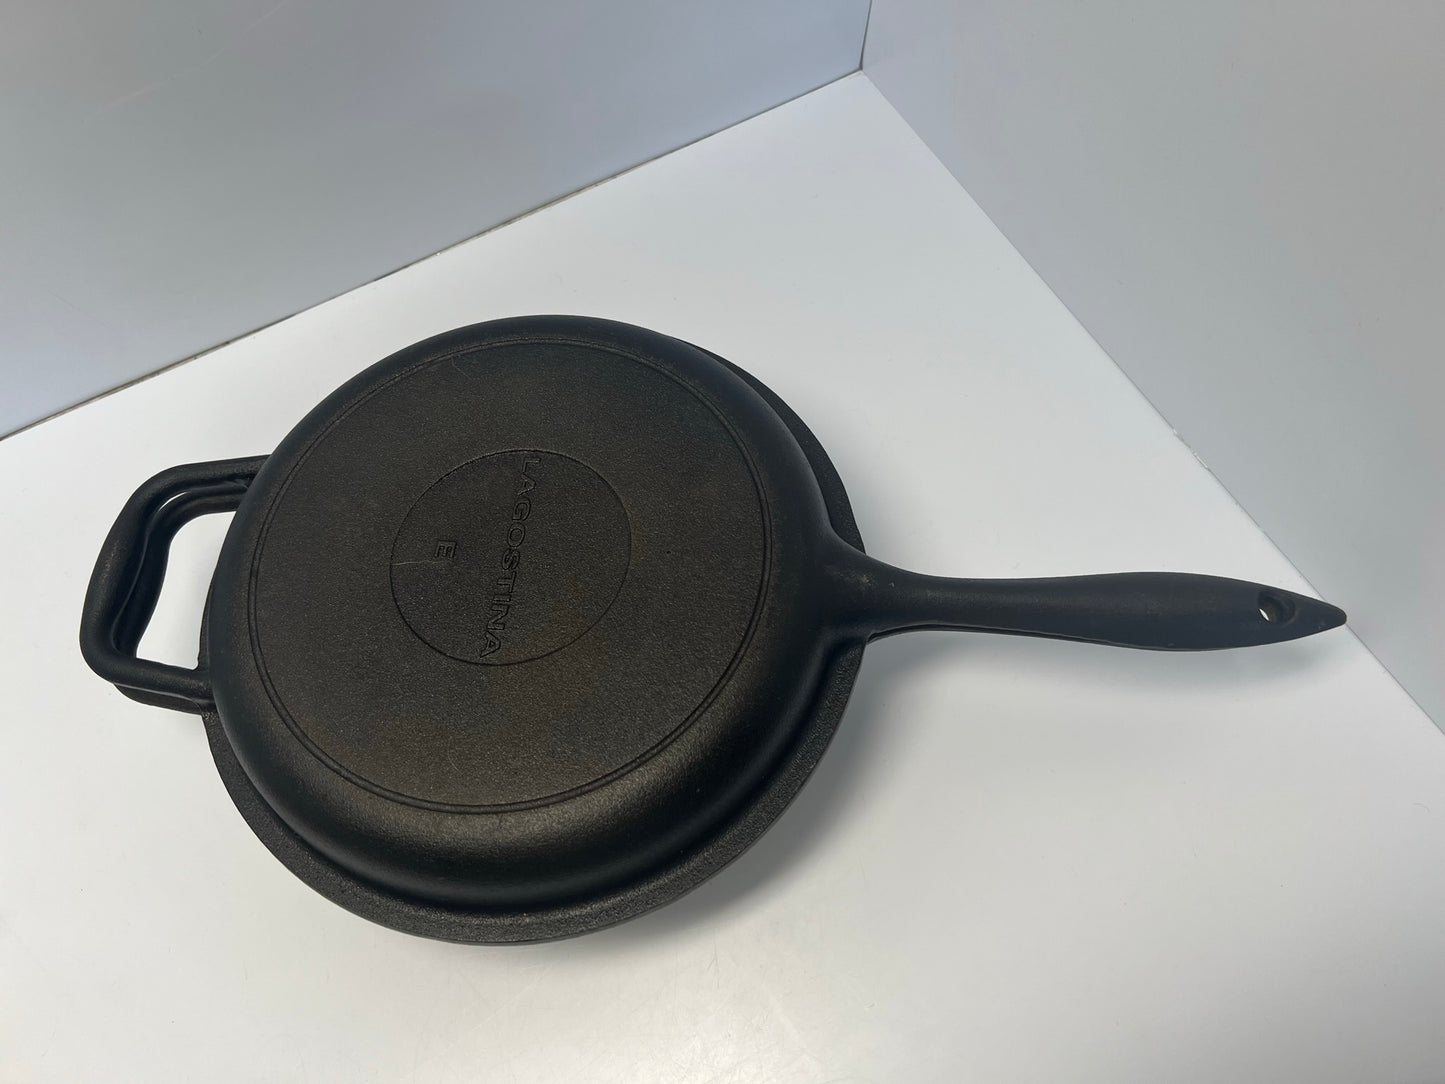 Cast Iron Camping Pot With Lid Lagostina 10 Inch Pot With Lid 2 in 1 Lid Is Also A Frying Pan Pot Is 3lts Excellent